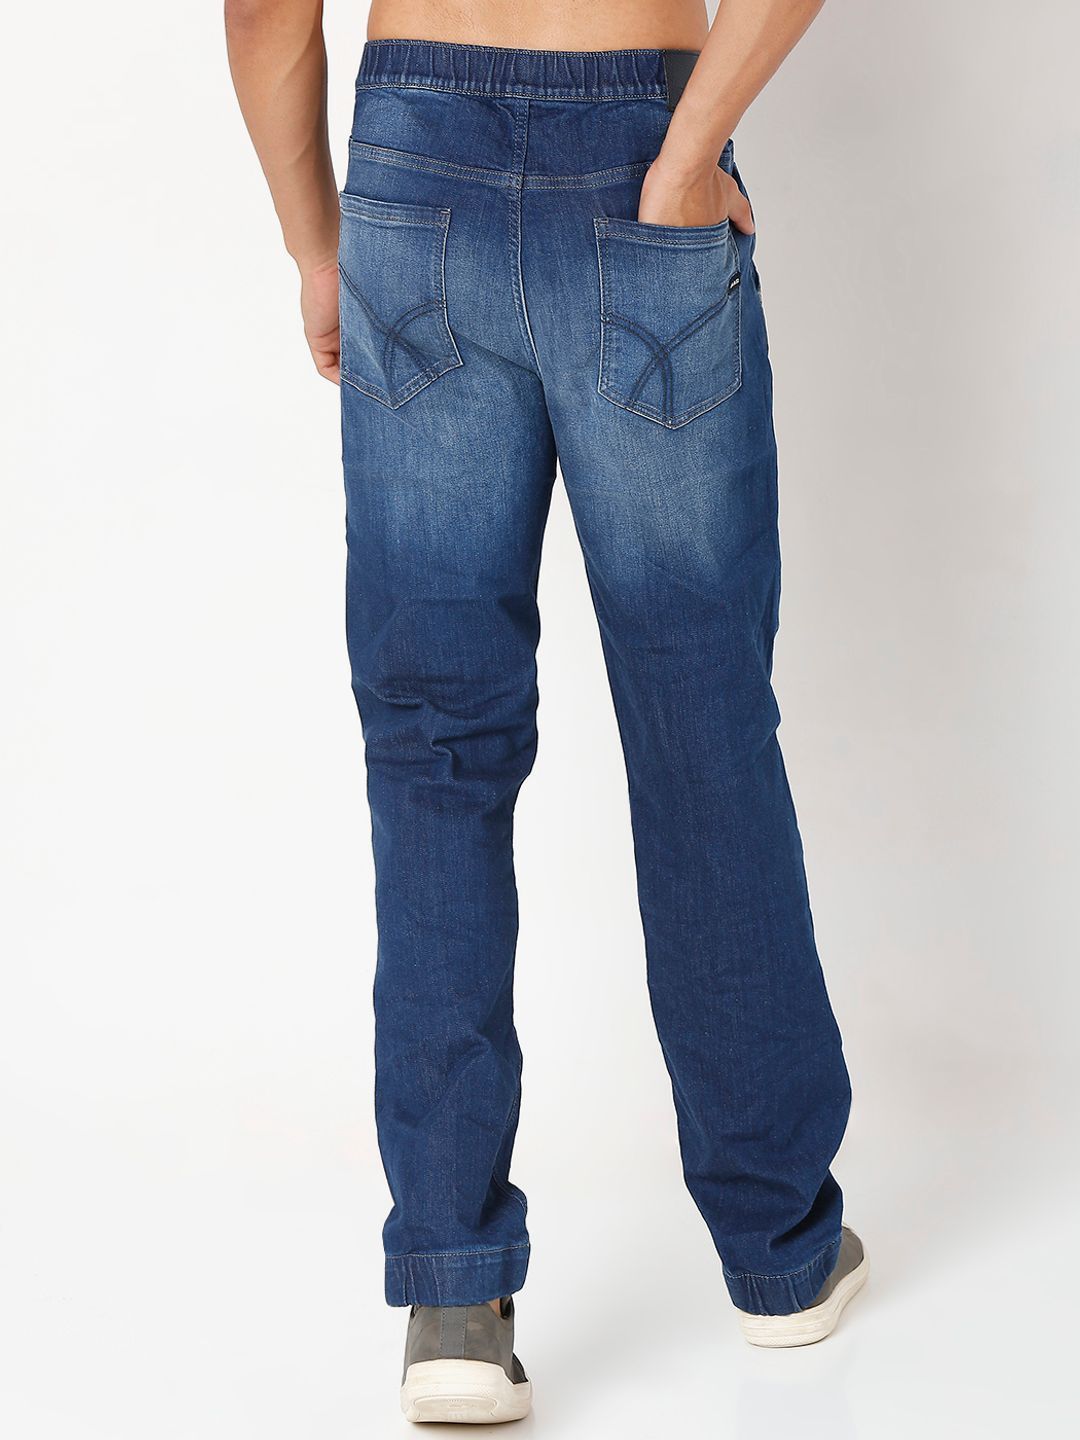 Men's New Rider IN Slim Fit Jeans